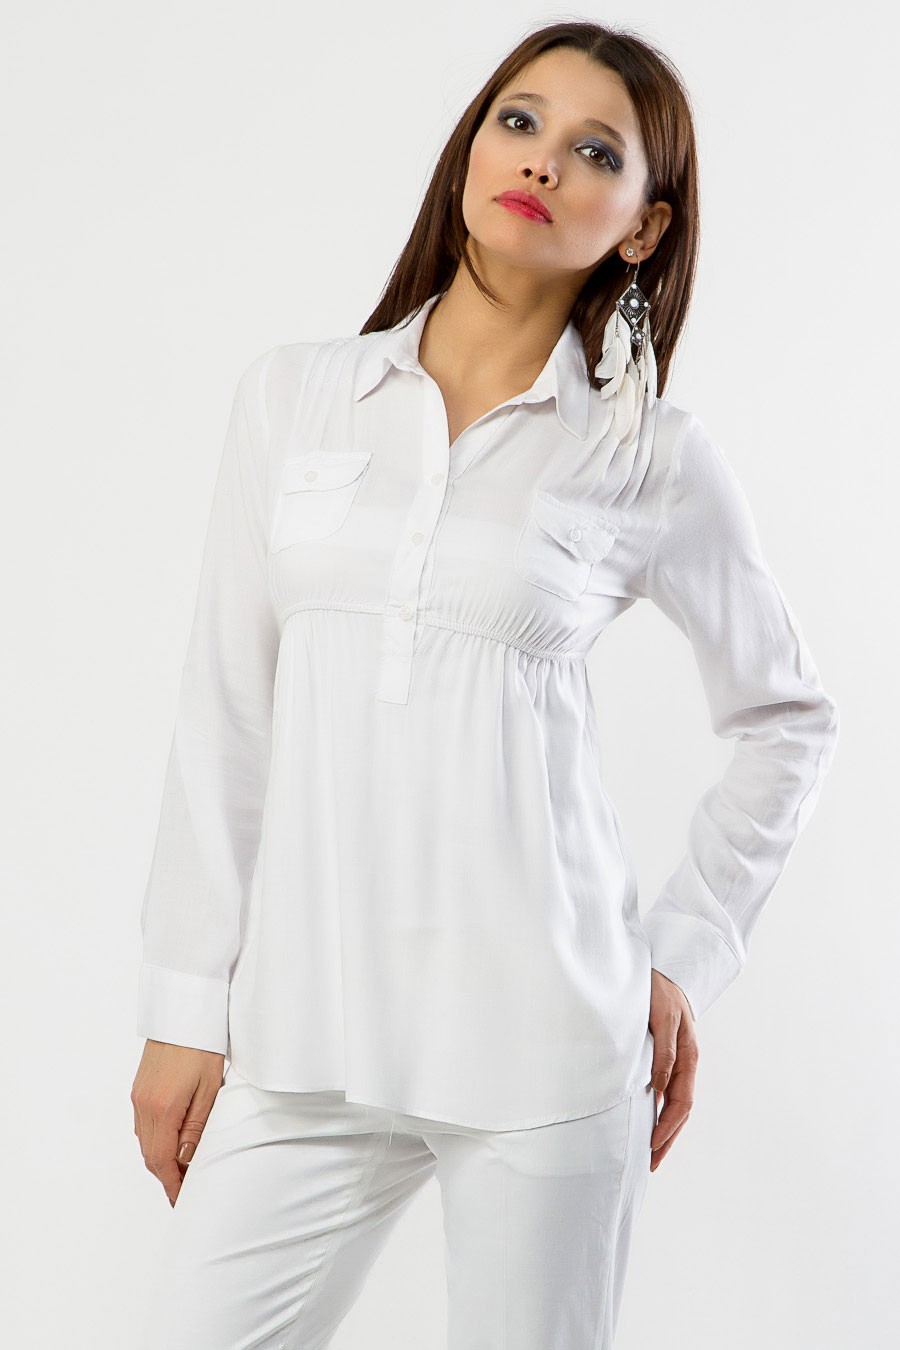 White Cotton Tops Collection 2013 | Fashion Tops with Western Style ...